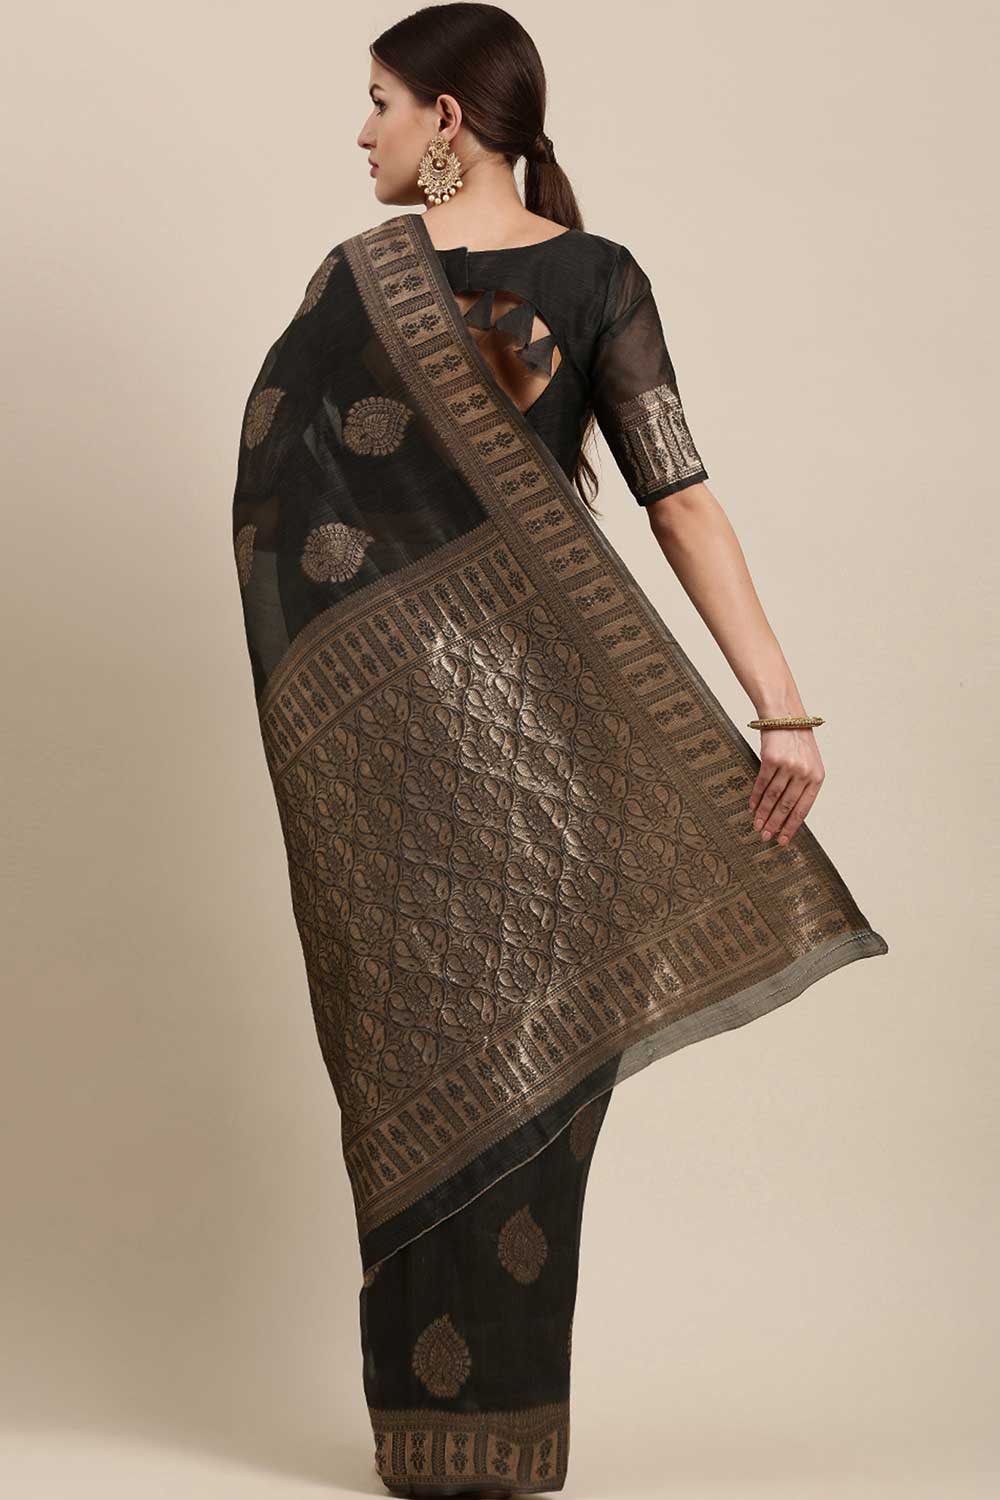 Shop Shubhi Charcoal Grey Bagh Blended Linen One Minute Saree at best offer at our  Store - One Minute Saree